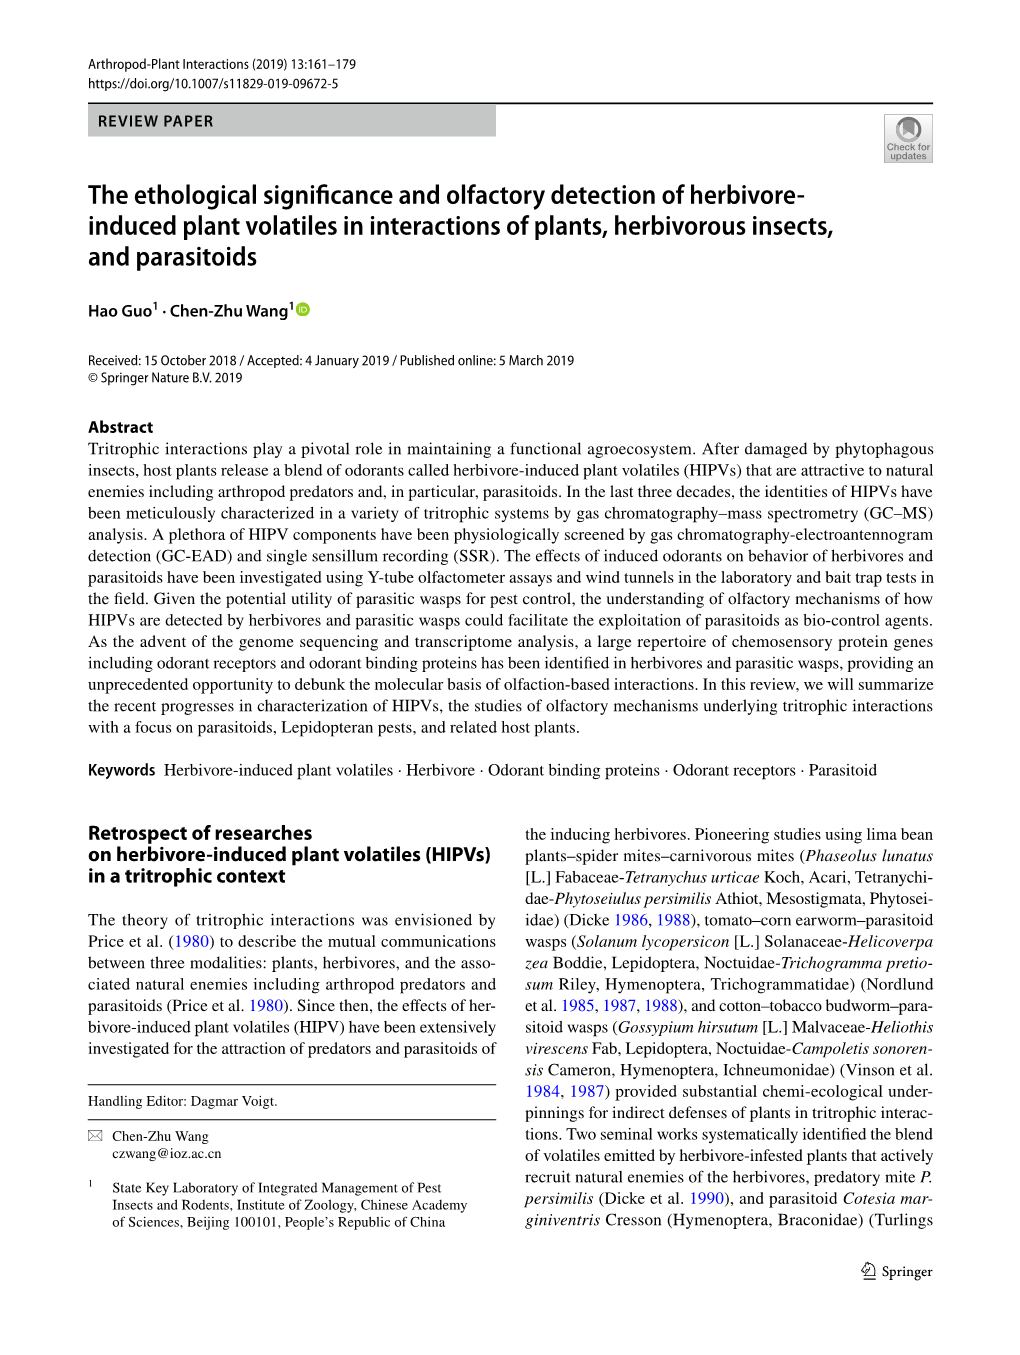 The Ethological Significance and Olfactory Detection of Herbivore-Induced Plant Volatiles in Interactions of Plants, Herbivorous